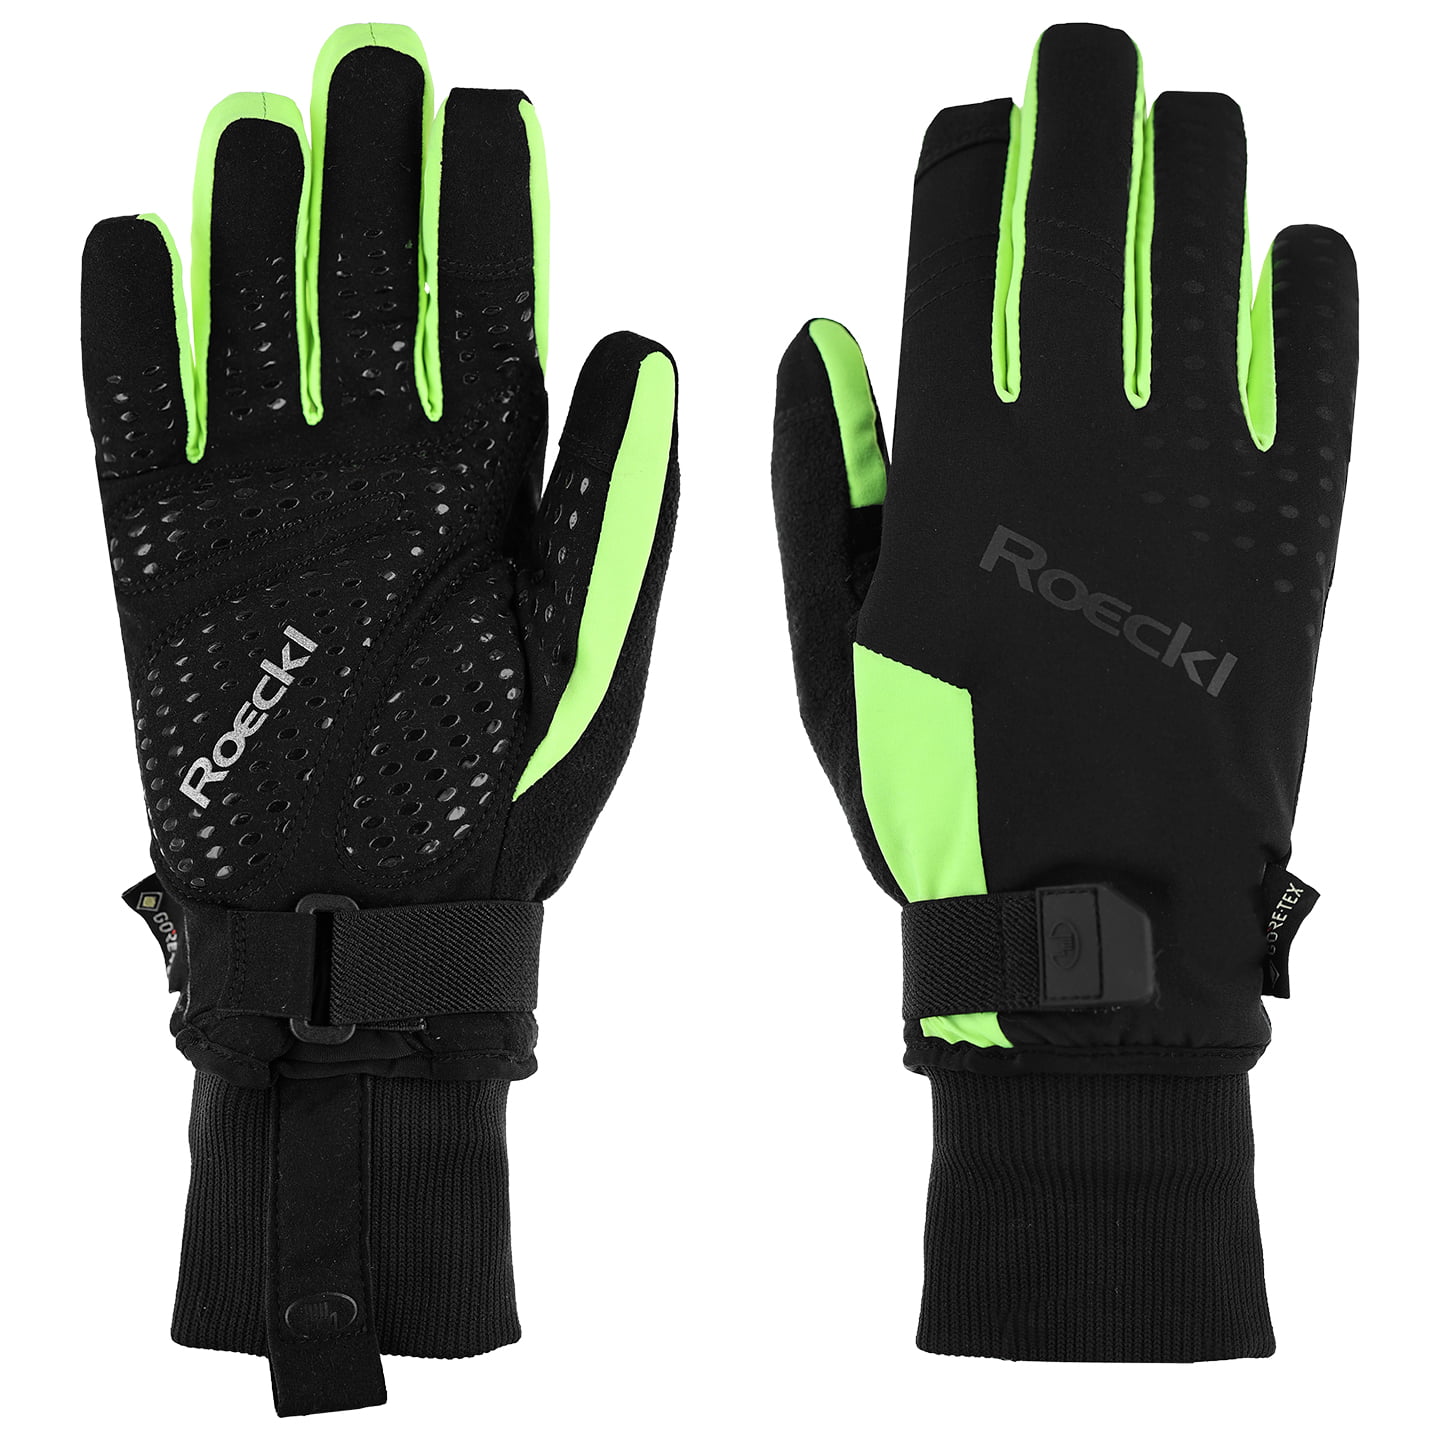 ROECKL Winter Gloves Rocca 2 GTX Winter Cycling Gloves, for men, size 8,5, MTB gloves, Cycling apparel